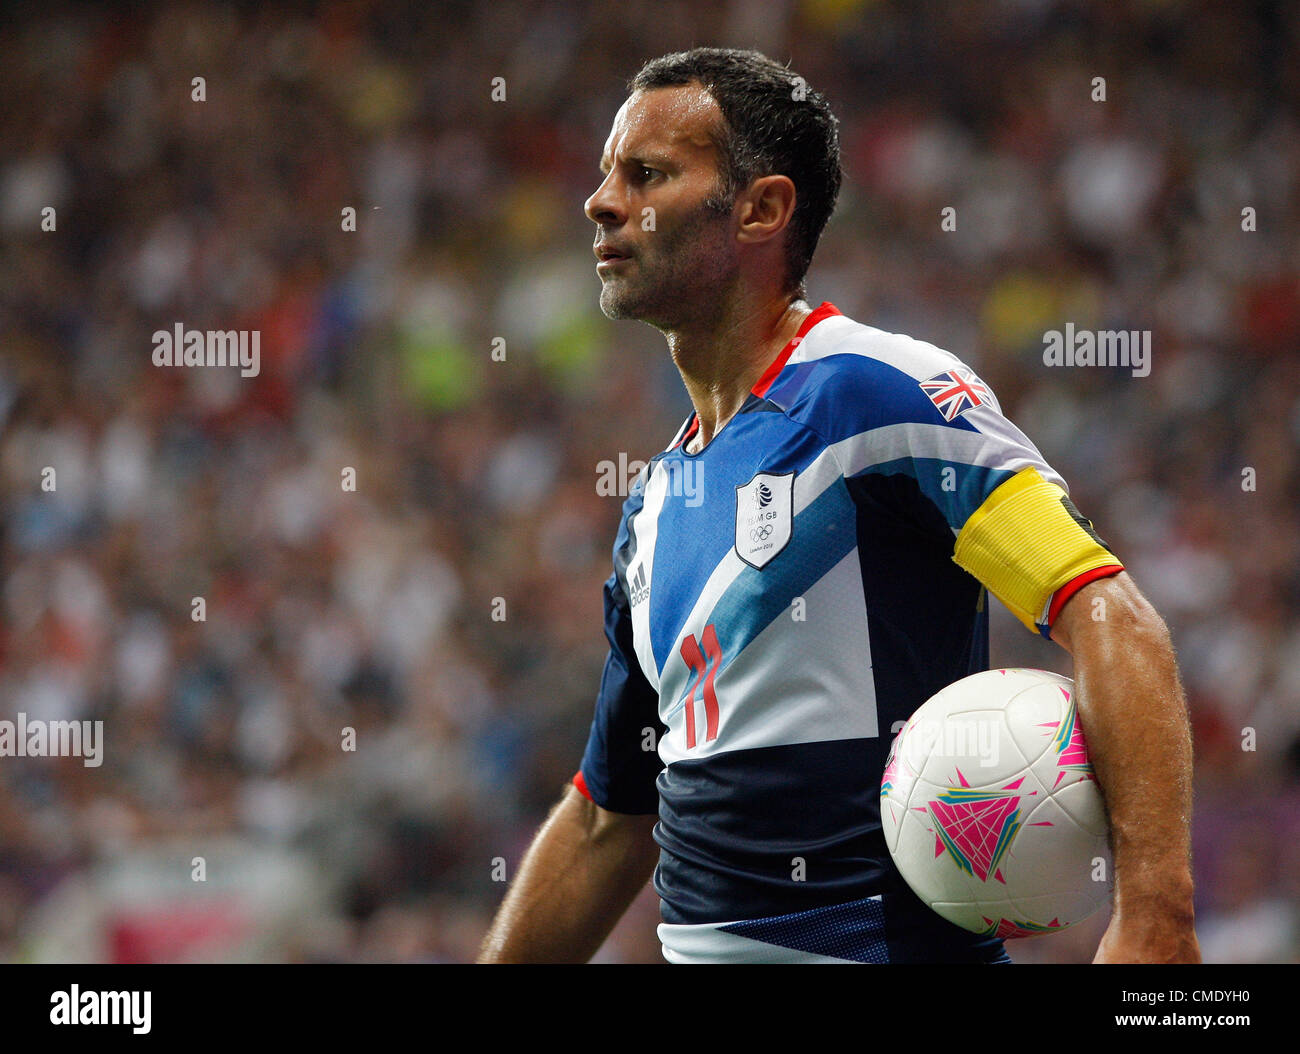 RYAN GIGGS GREAT BRITAIN OLD TRAFFORD MANCHESTER ENGLAND 26 July 2012 Stock Photo